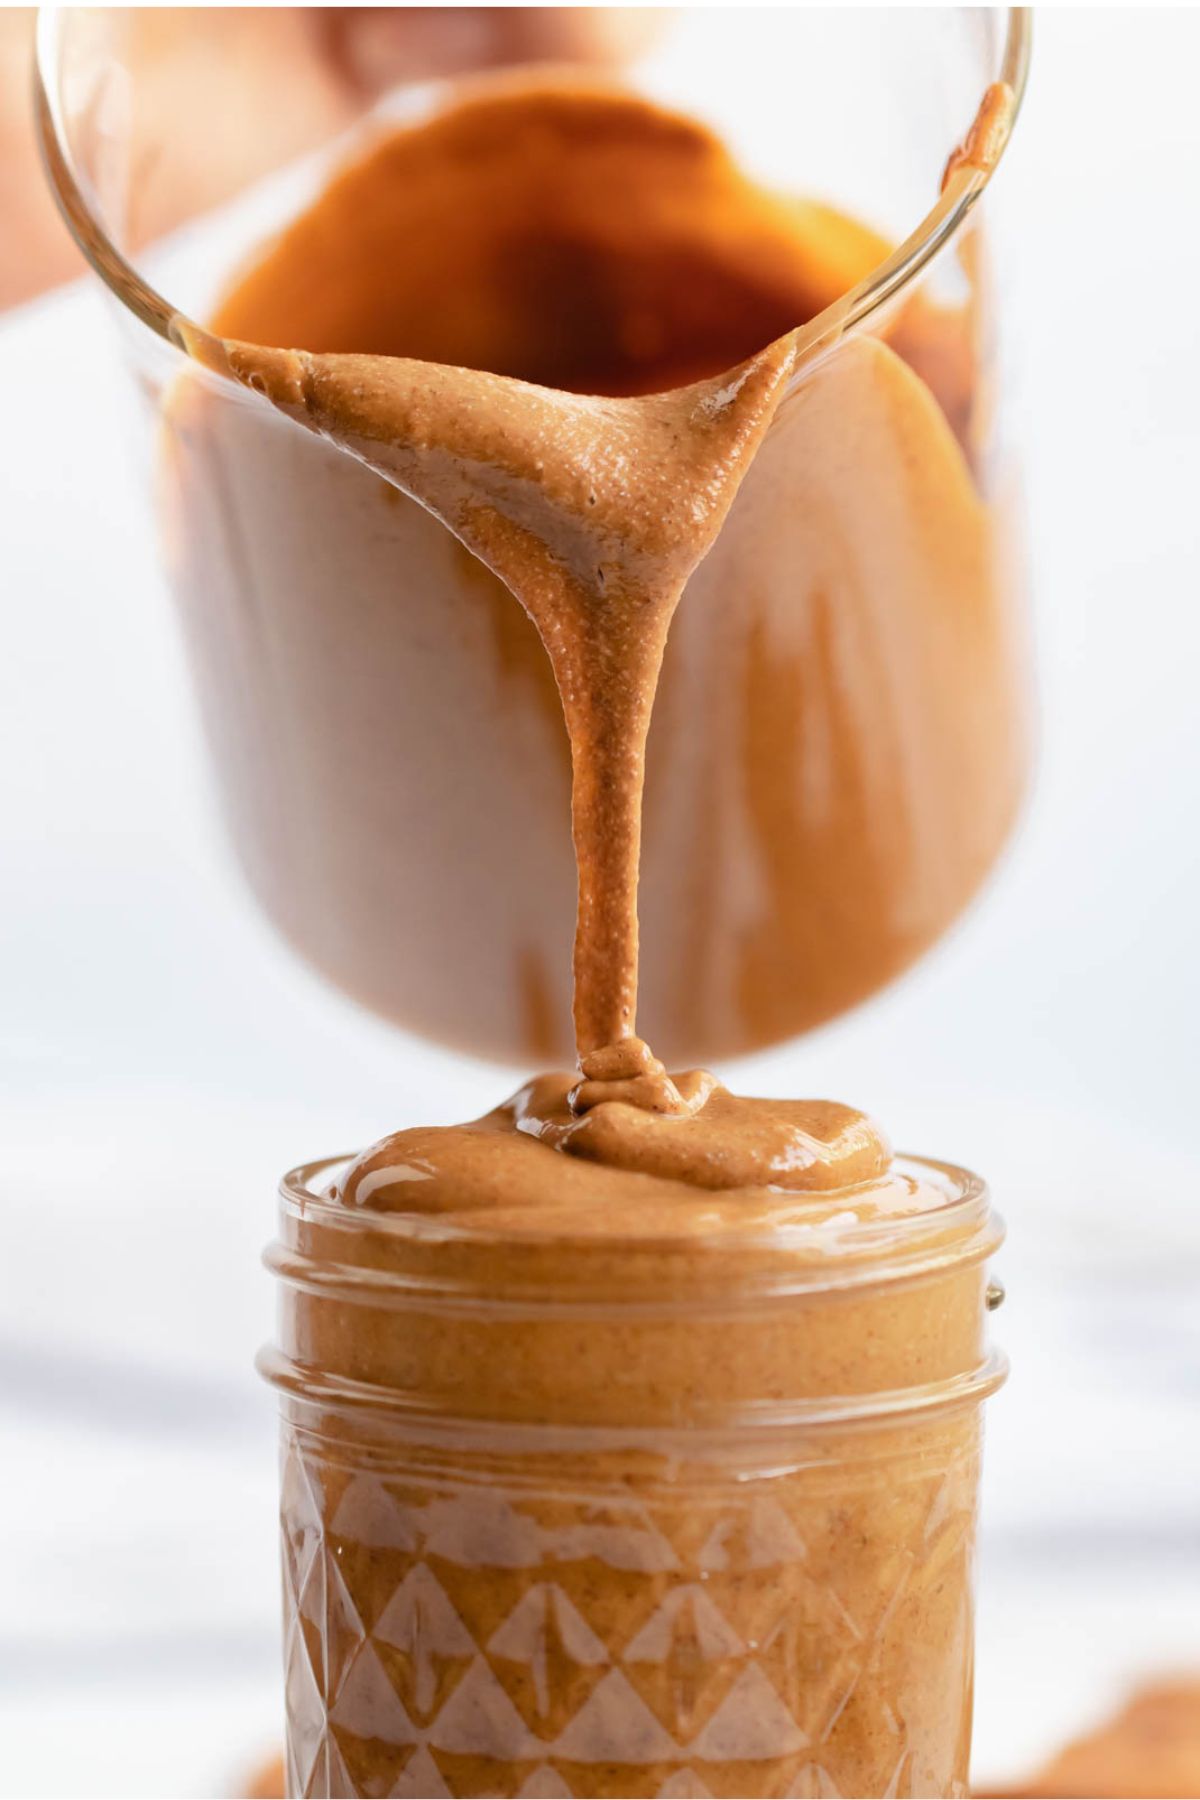 Pour shot of almond butter.